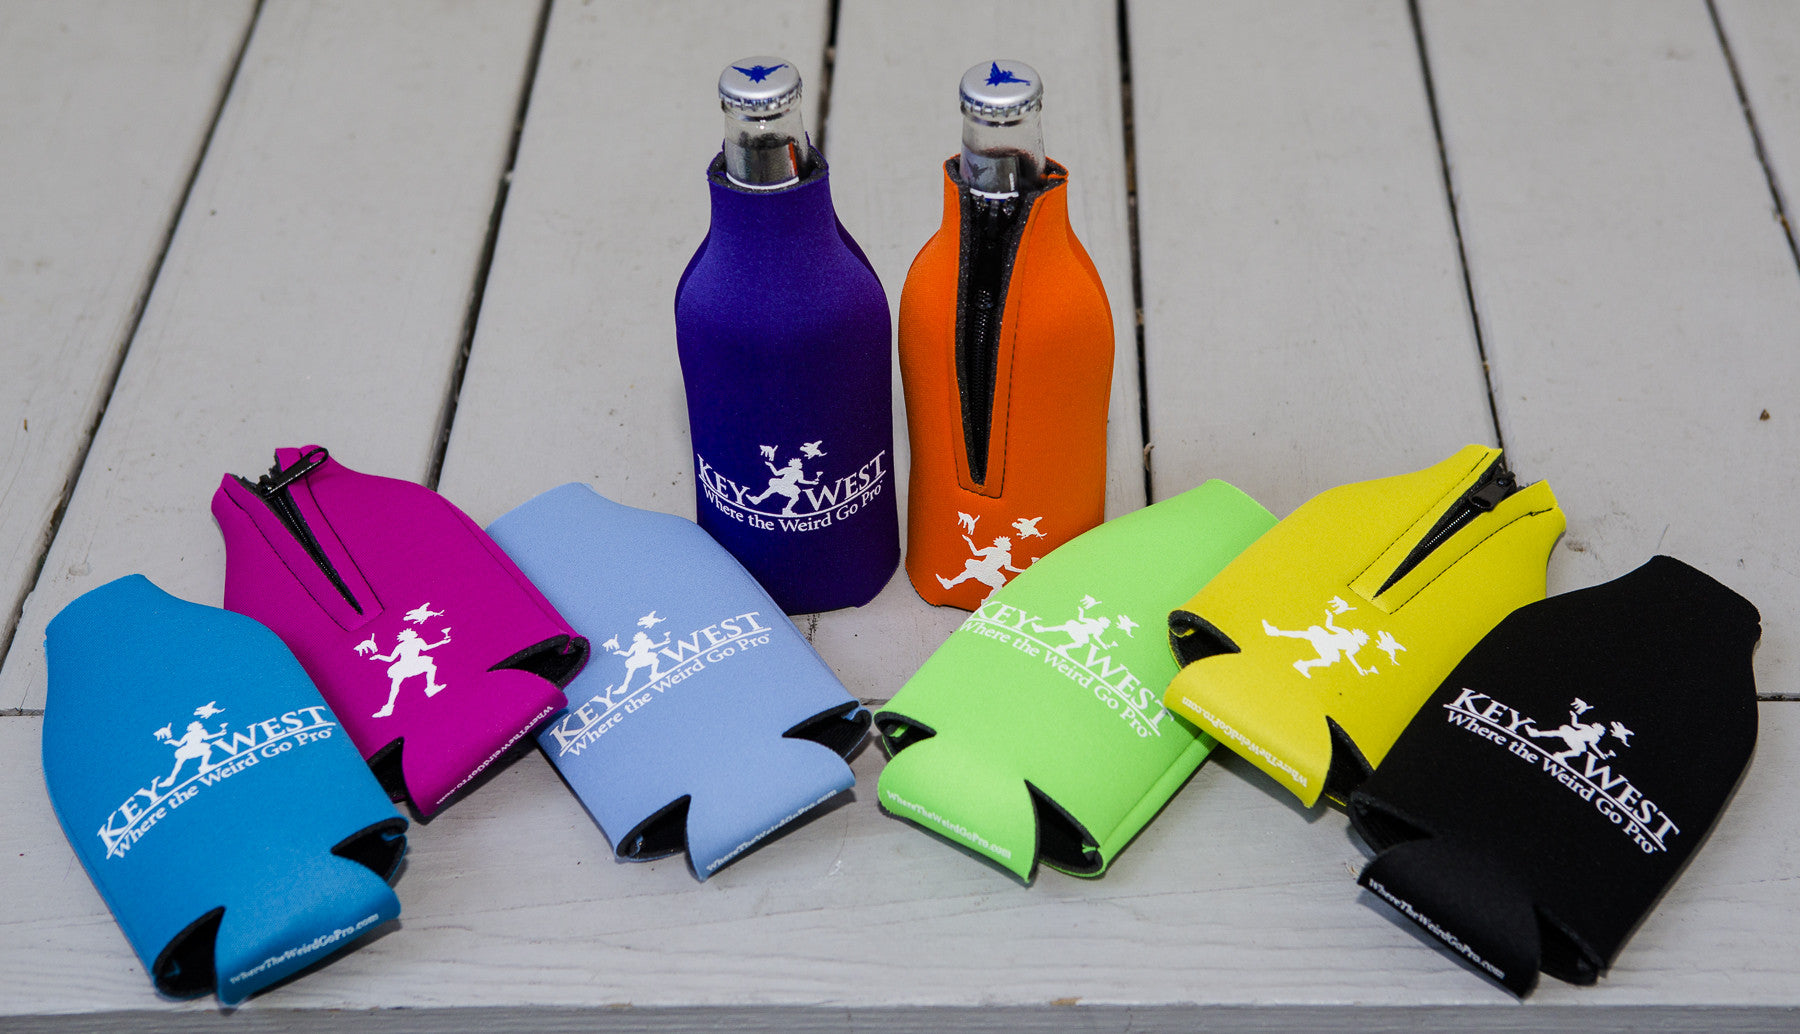 Bottle Coozie